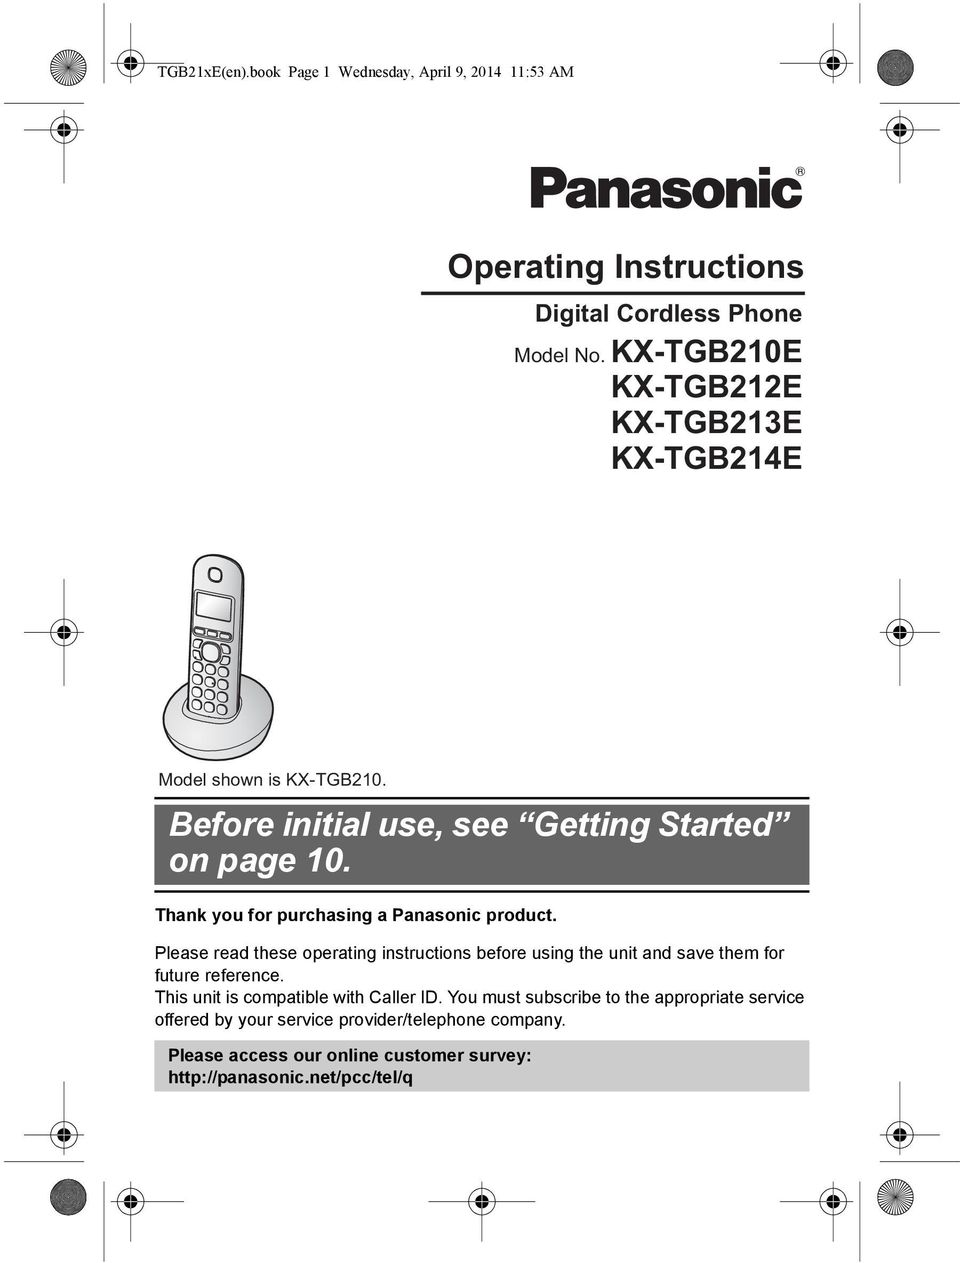 Thank you for purchasing a Panasonic product. Please read these operating instructions before using the unit and save them for future reference.